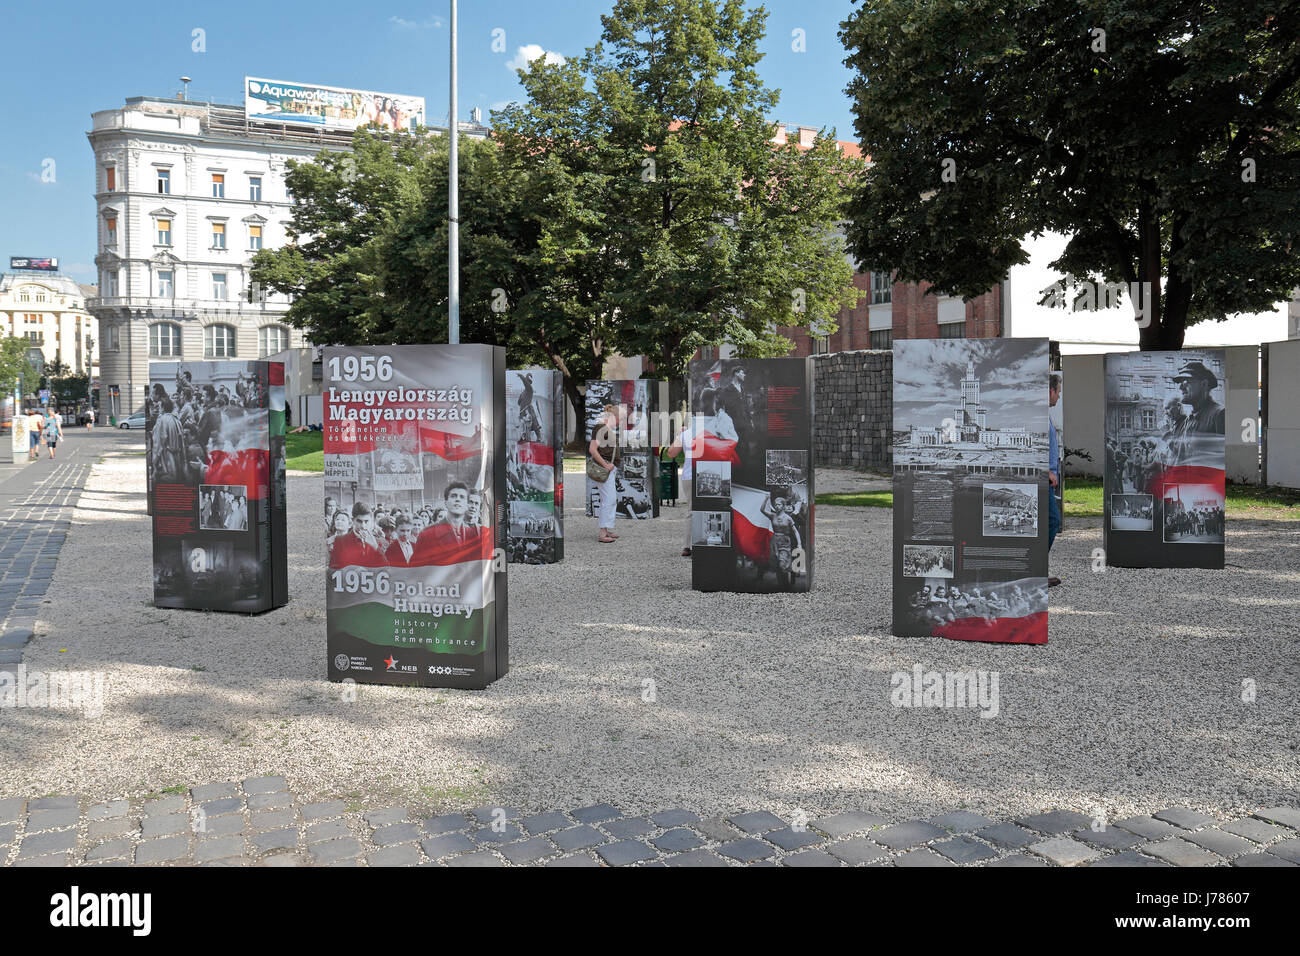 Outdoor photograph display commemorating the 1956 Revolution in Budapest, Hungary. Stock Photo